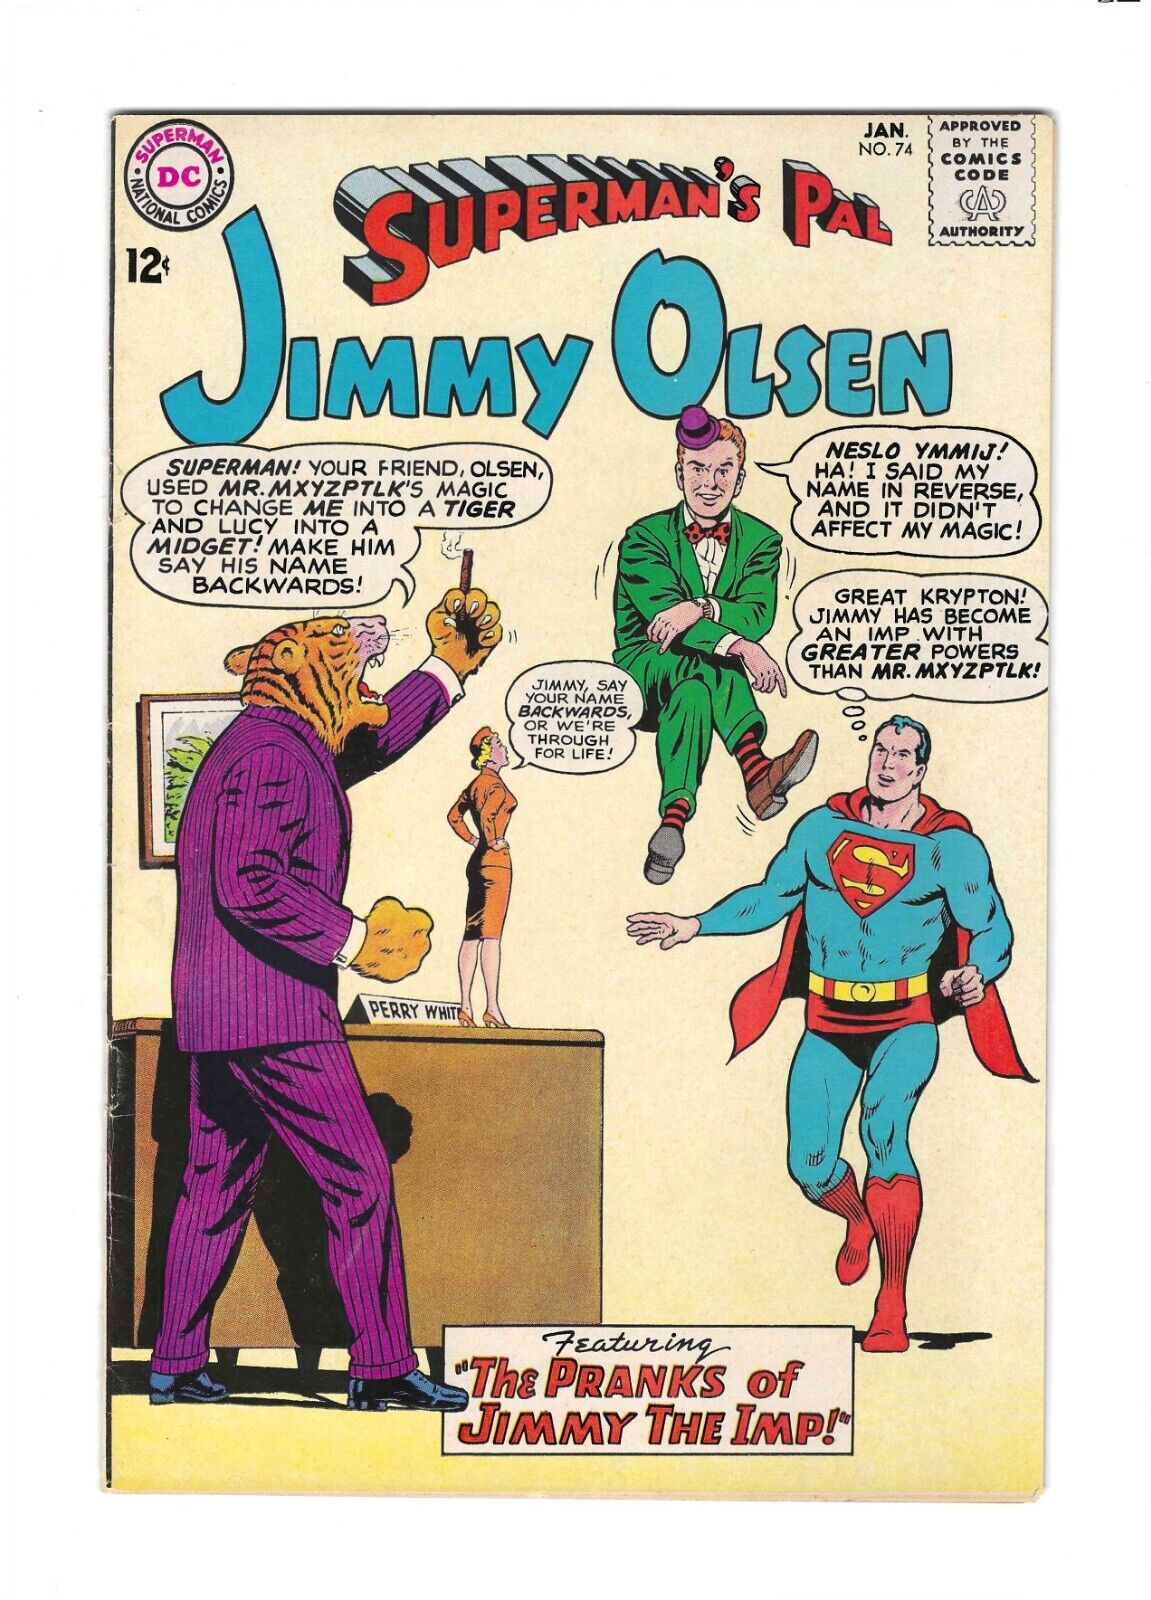 Superman's Pal Jimmy Olsen #74: Dry Cleaned: Pressed: Bagged: Boarded: FN-VF 7.0